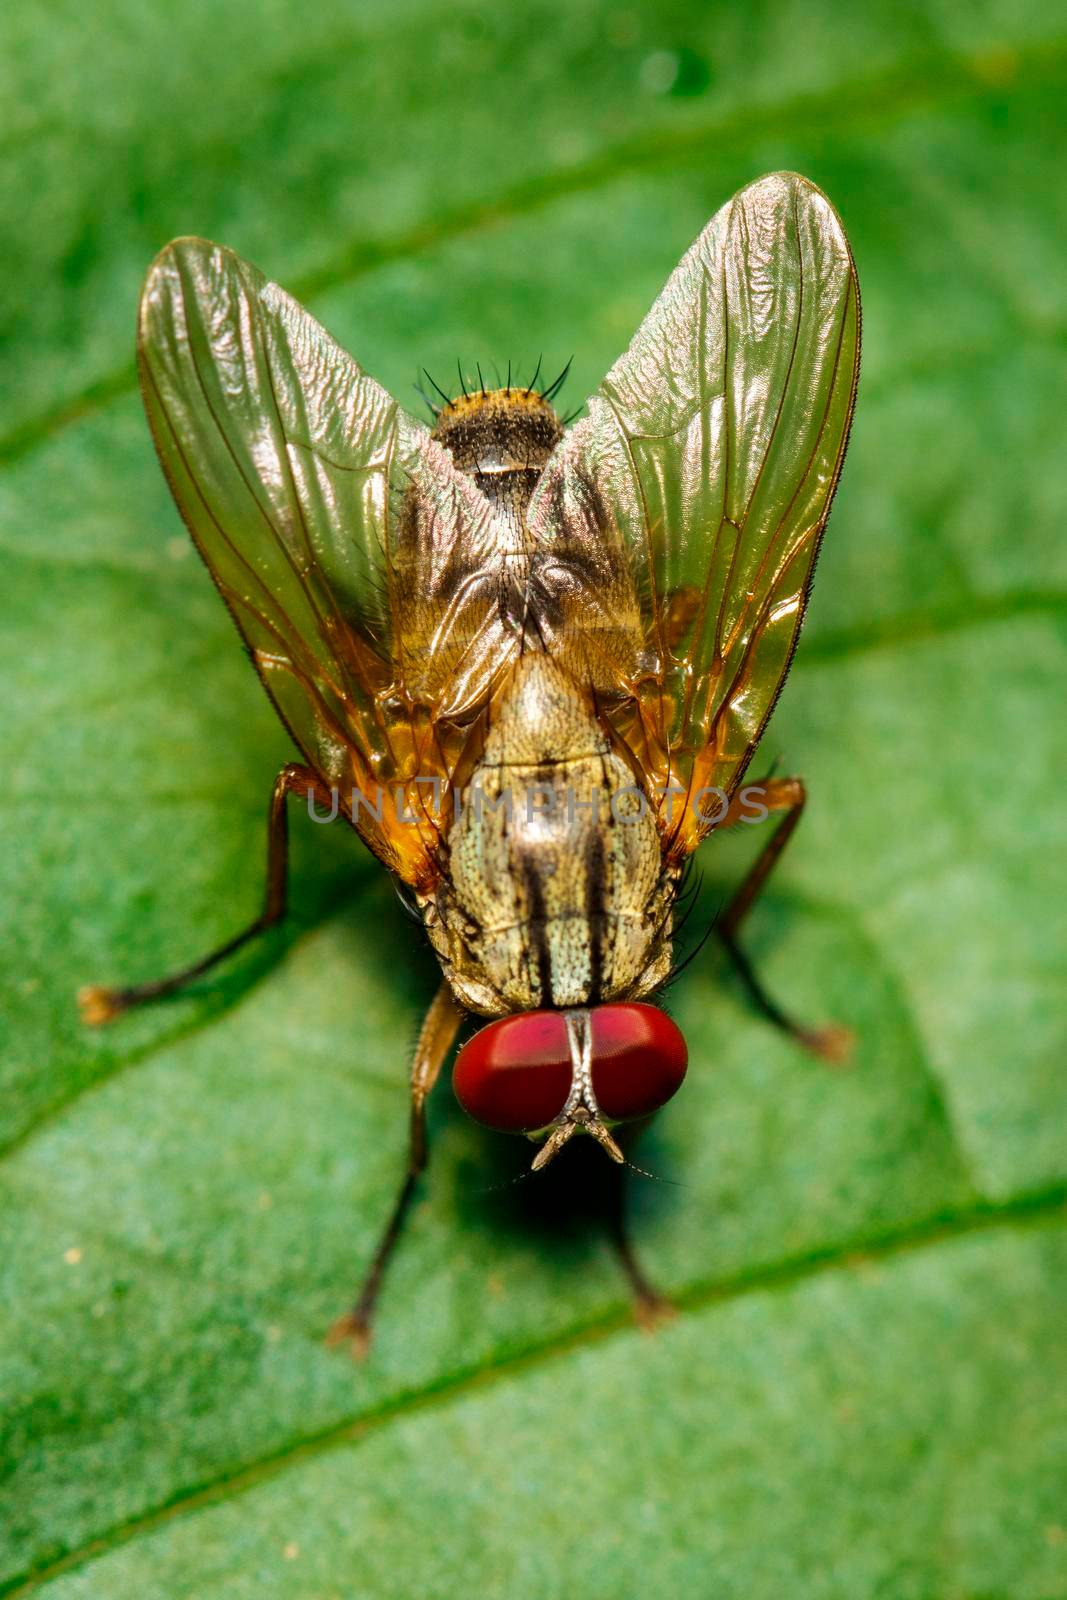 Image of a flies (Diptera) on green leaves. Insect. Animal